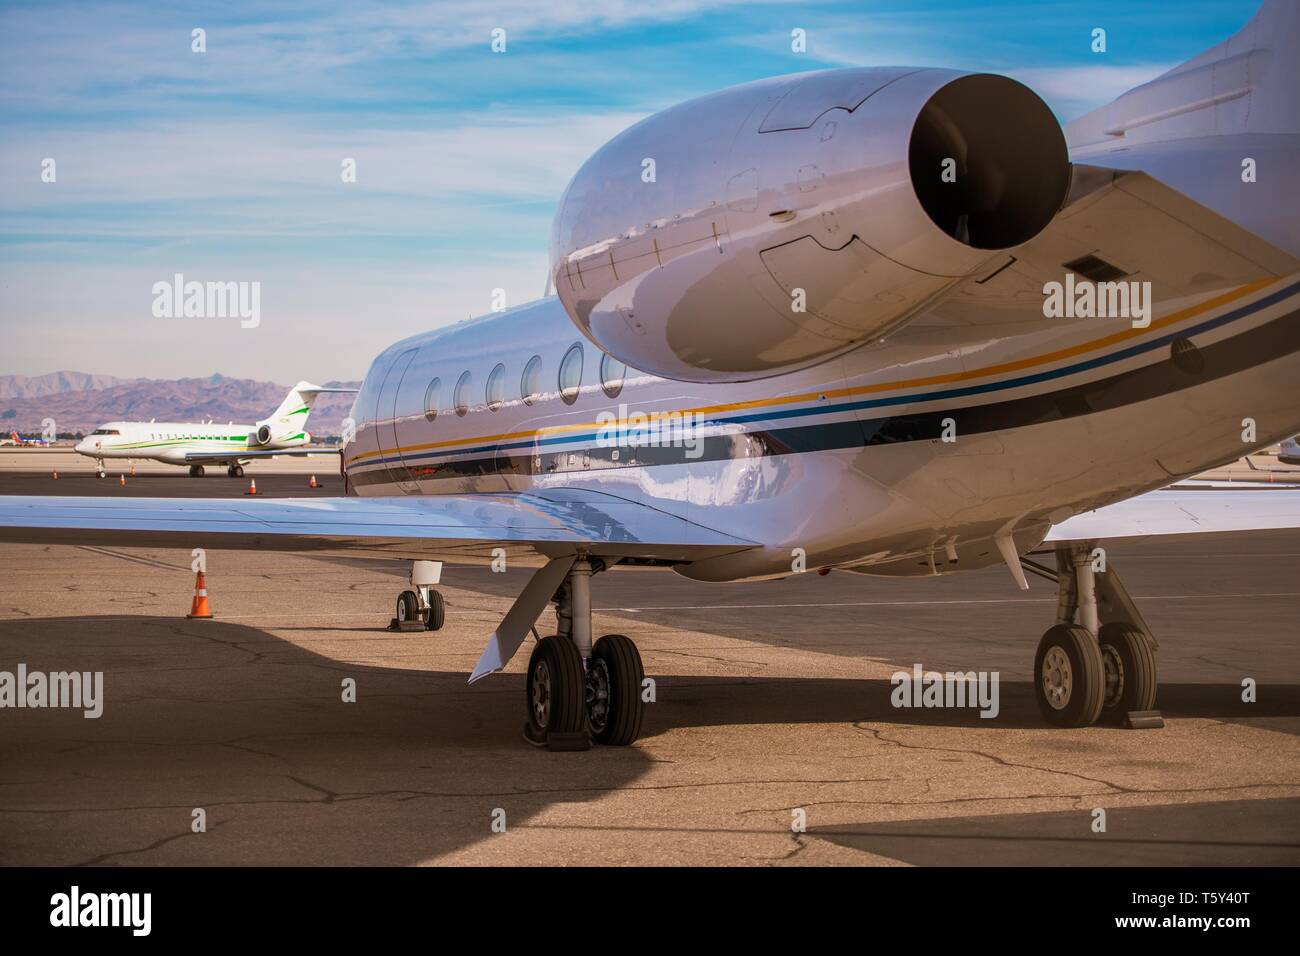 Air Charter Jet Airplane. Airport Area. Modern Air Transportation Theme. Stock Photo